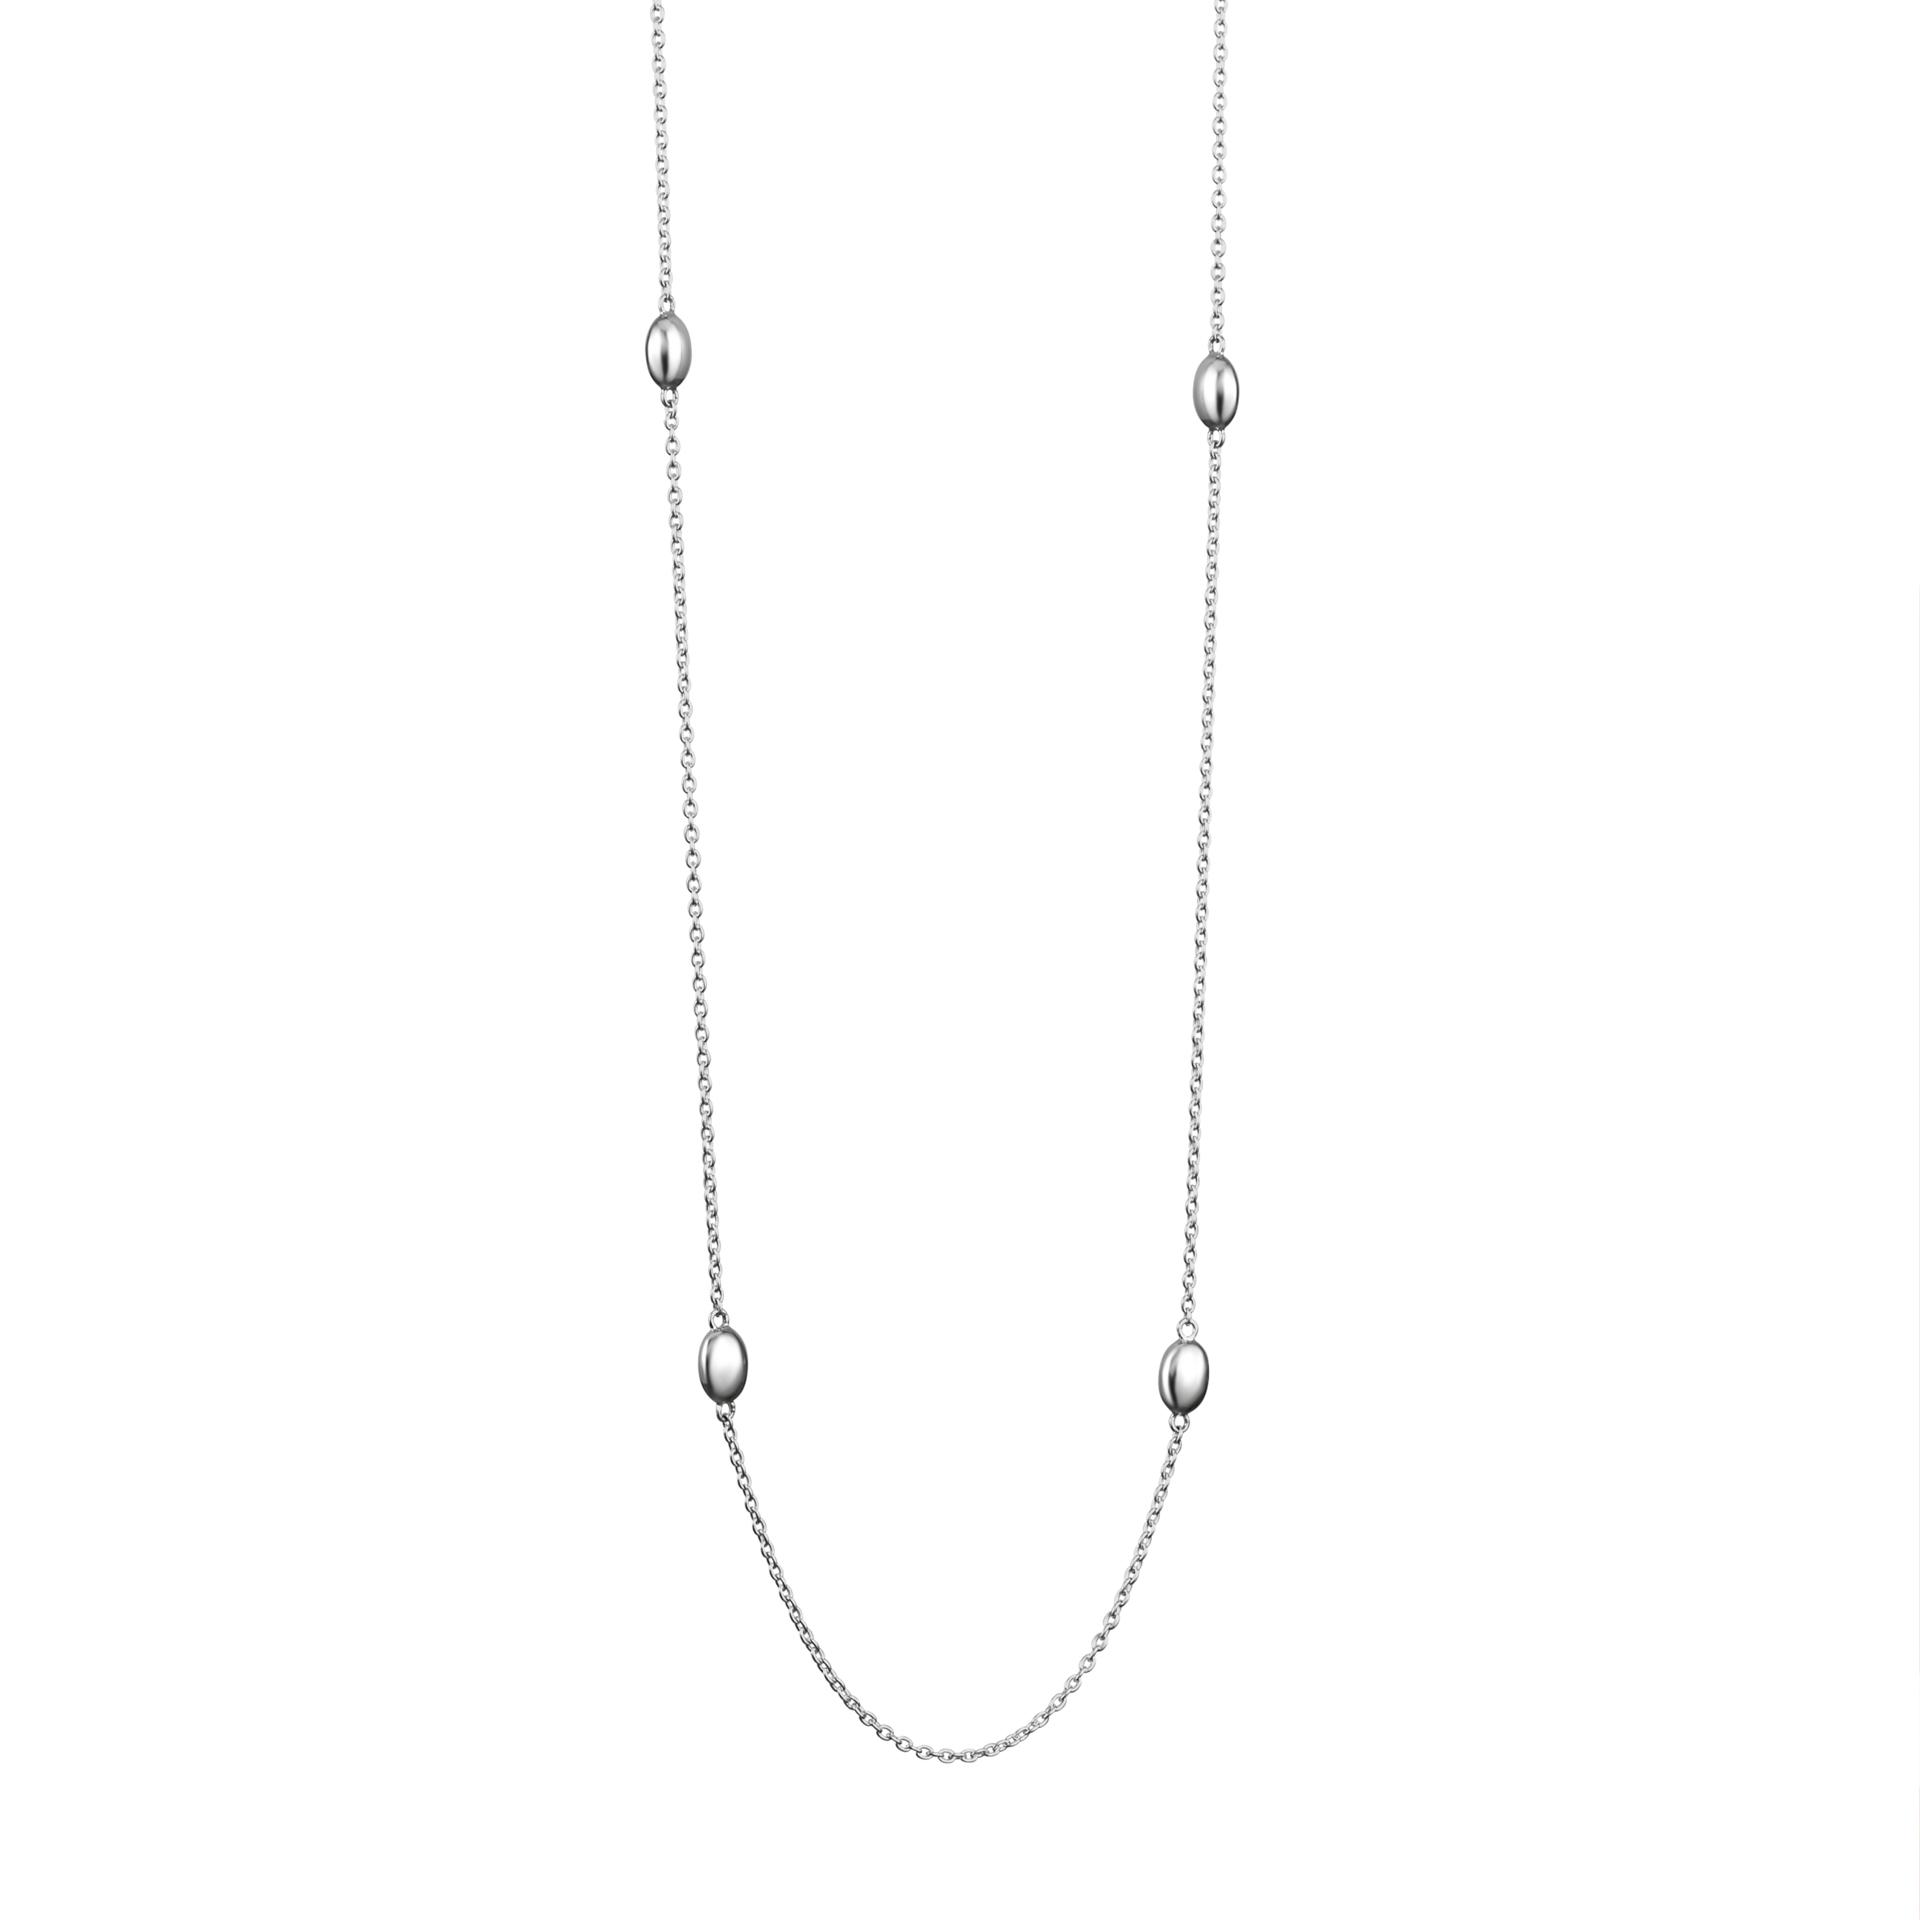 Love Bead Long Necklace - Silver